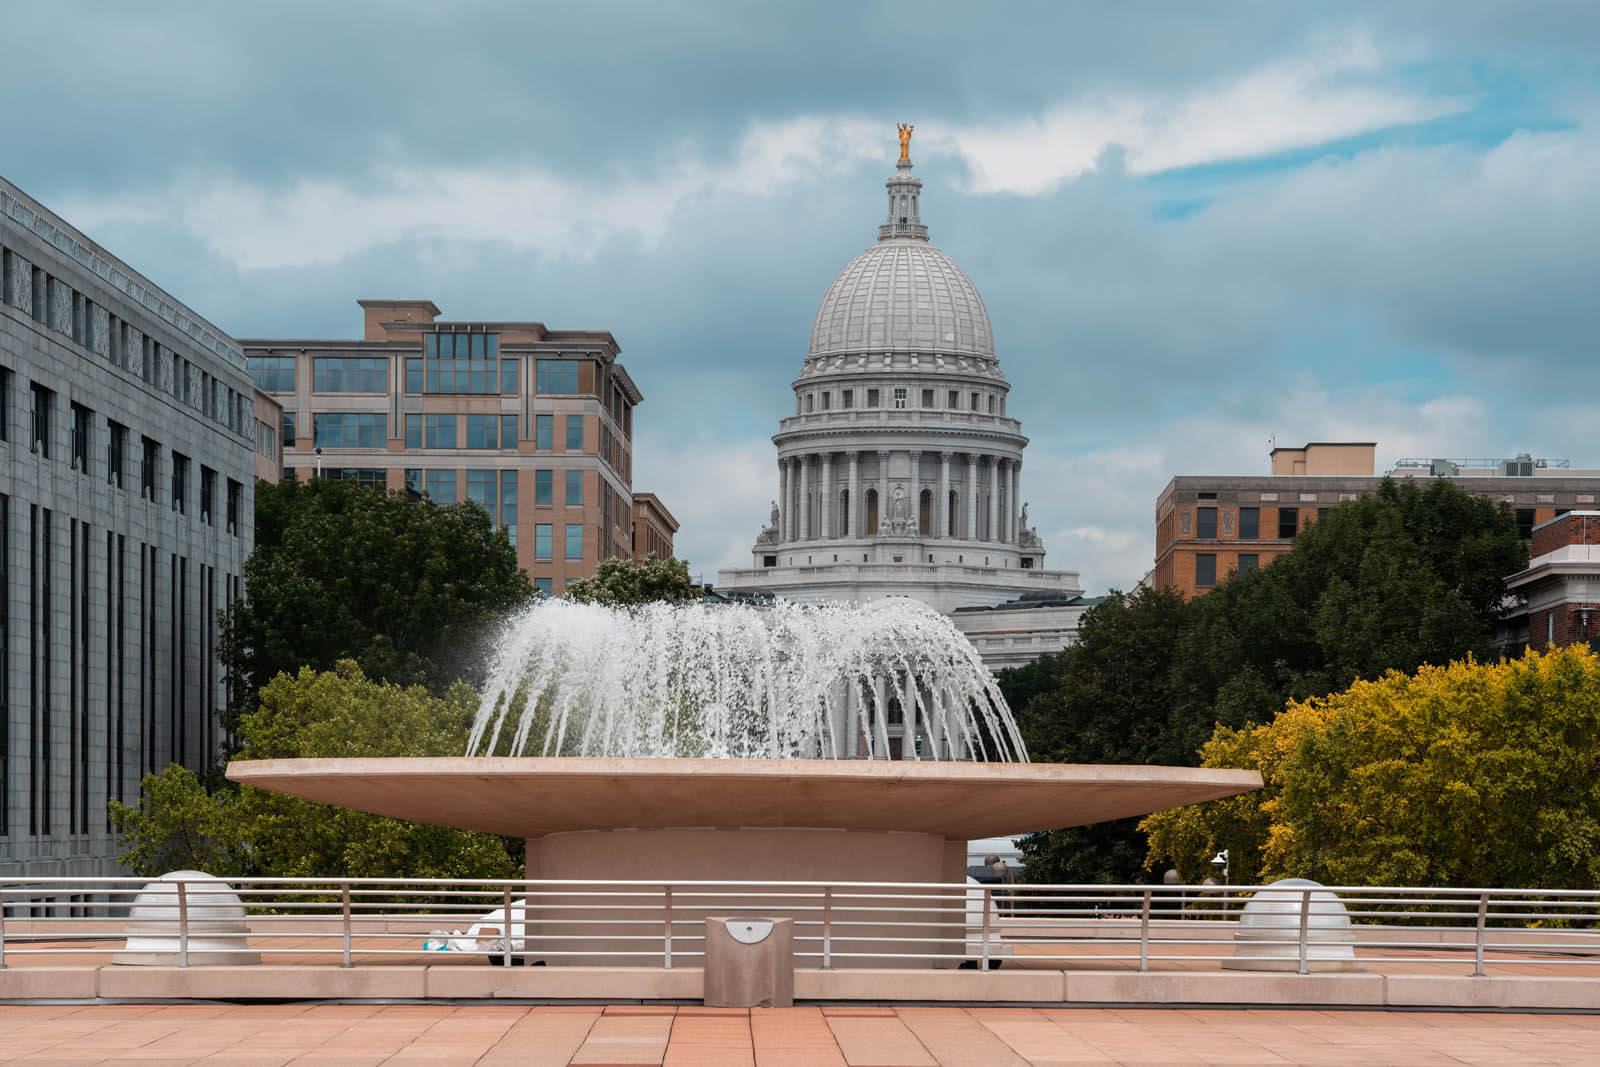 view of the Wisconson State Capitol Building from the Monona Terrace in Madison